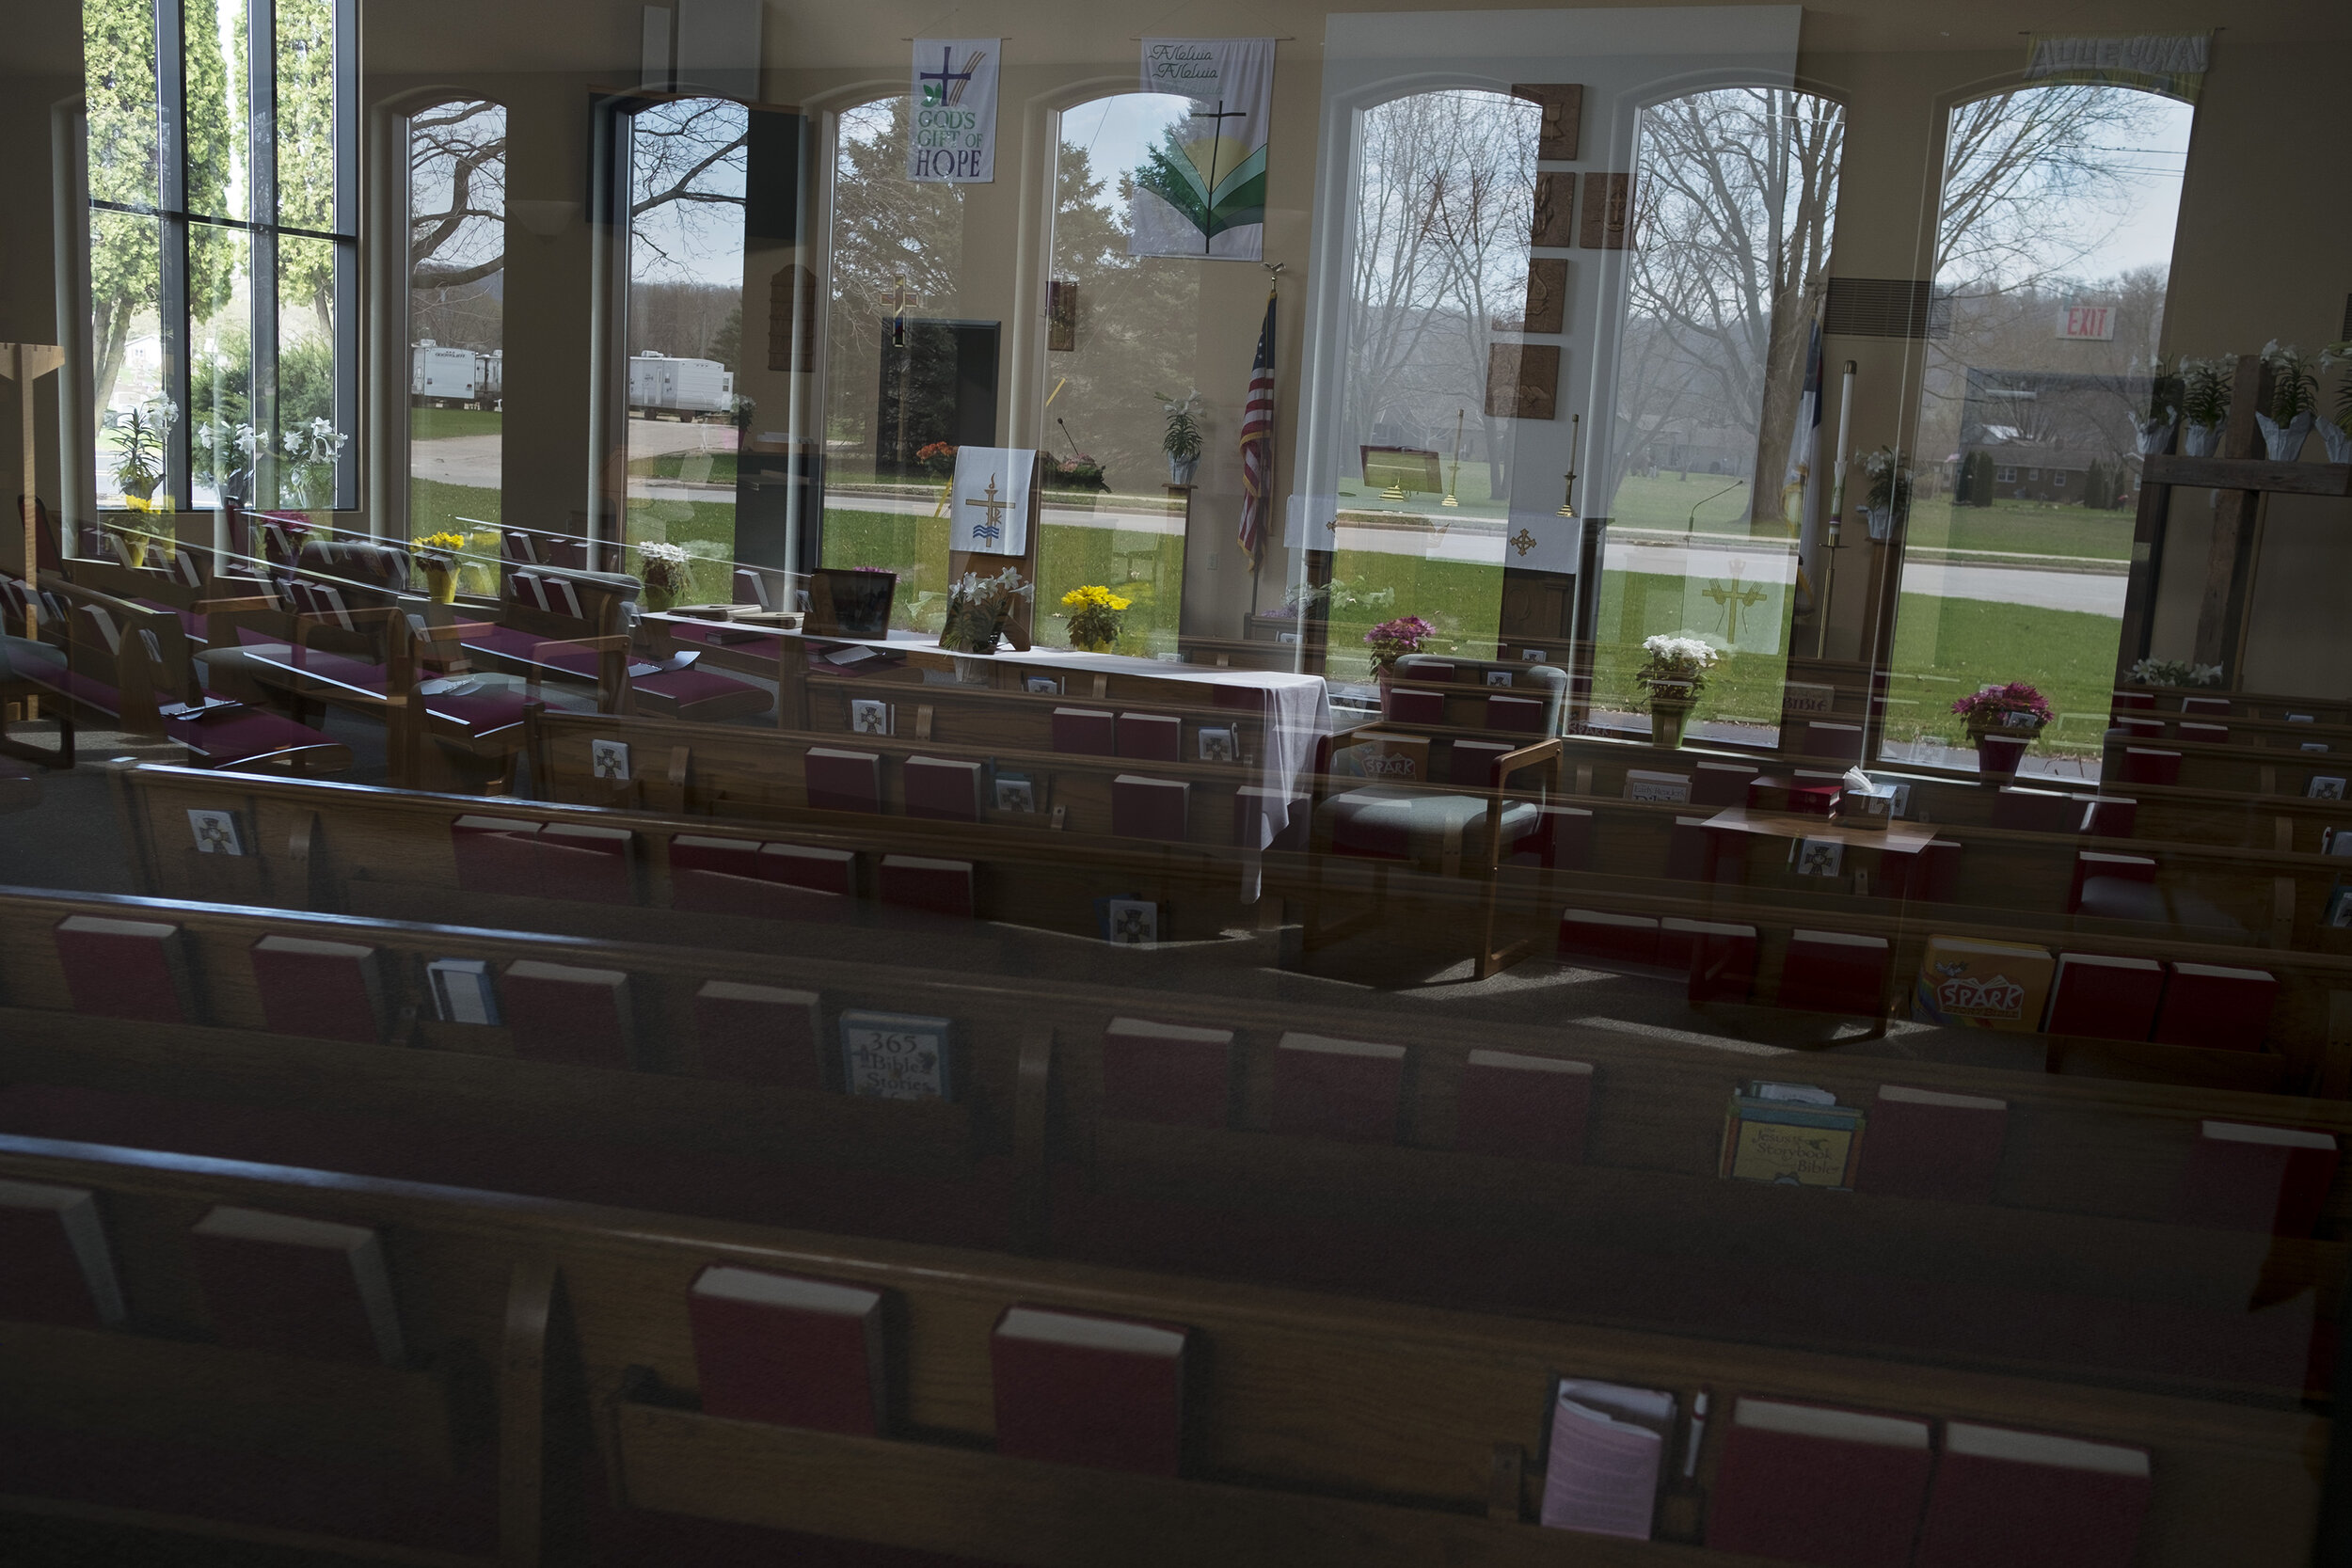  The worship center and surrounding area at Faith Lutheran Church, ELCA are reflected in glass on Wednesday, April 24, 2019 in Wabasha, Minnesota. Mental health care providers, public health officials, farmers, and farming advocates from the state’s 